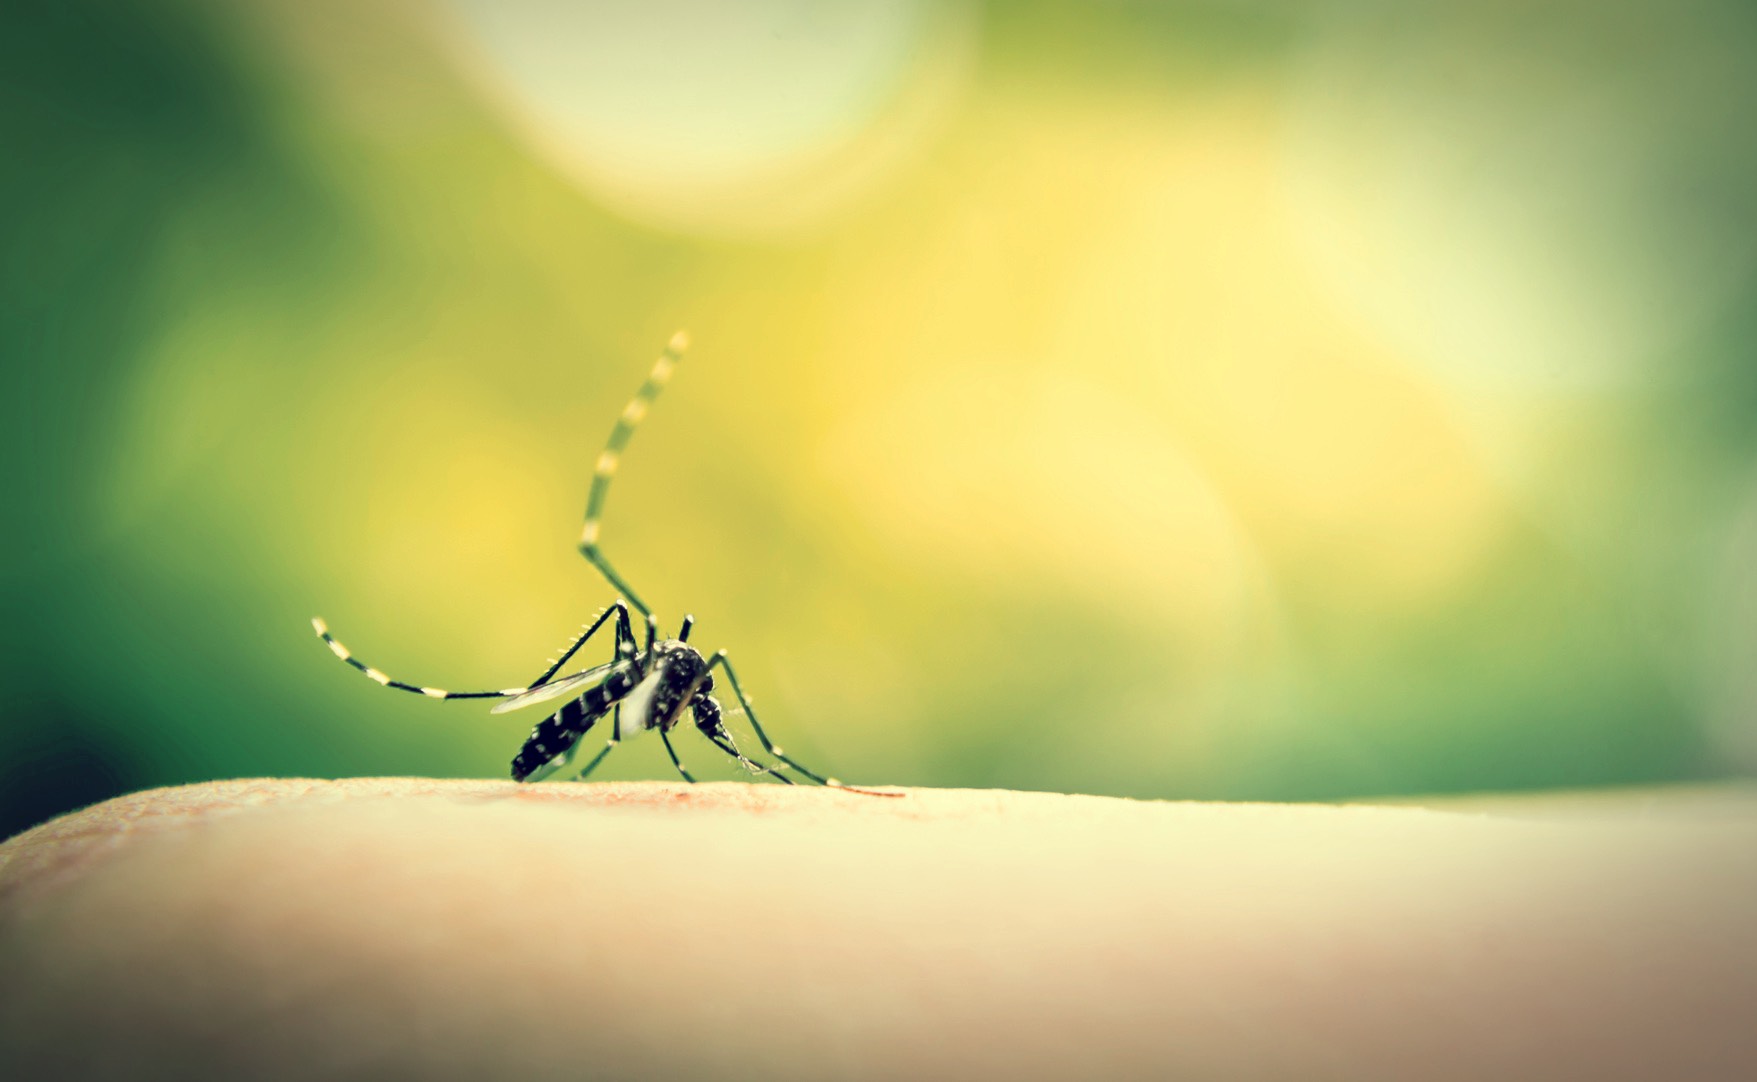 Tips to Avoid Zika Infected Mosquitoes